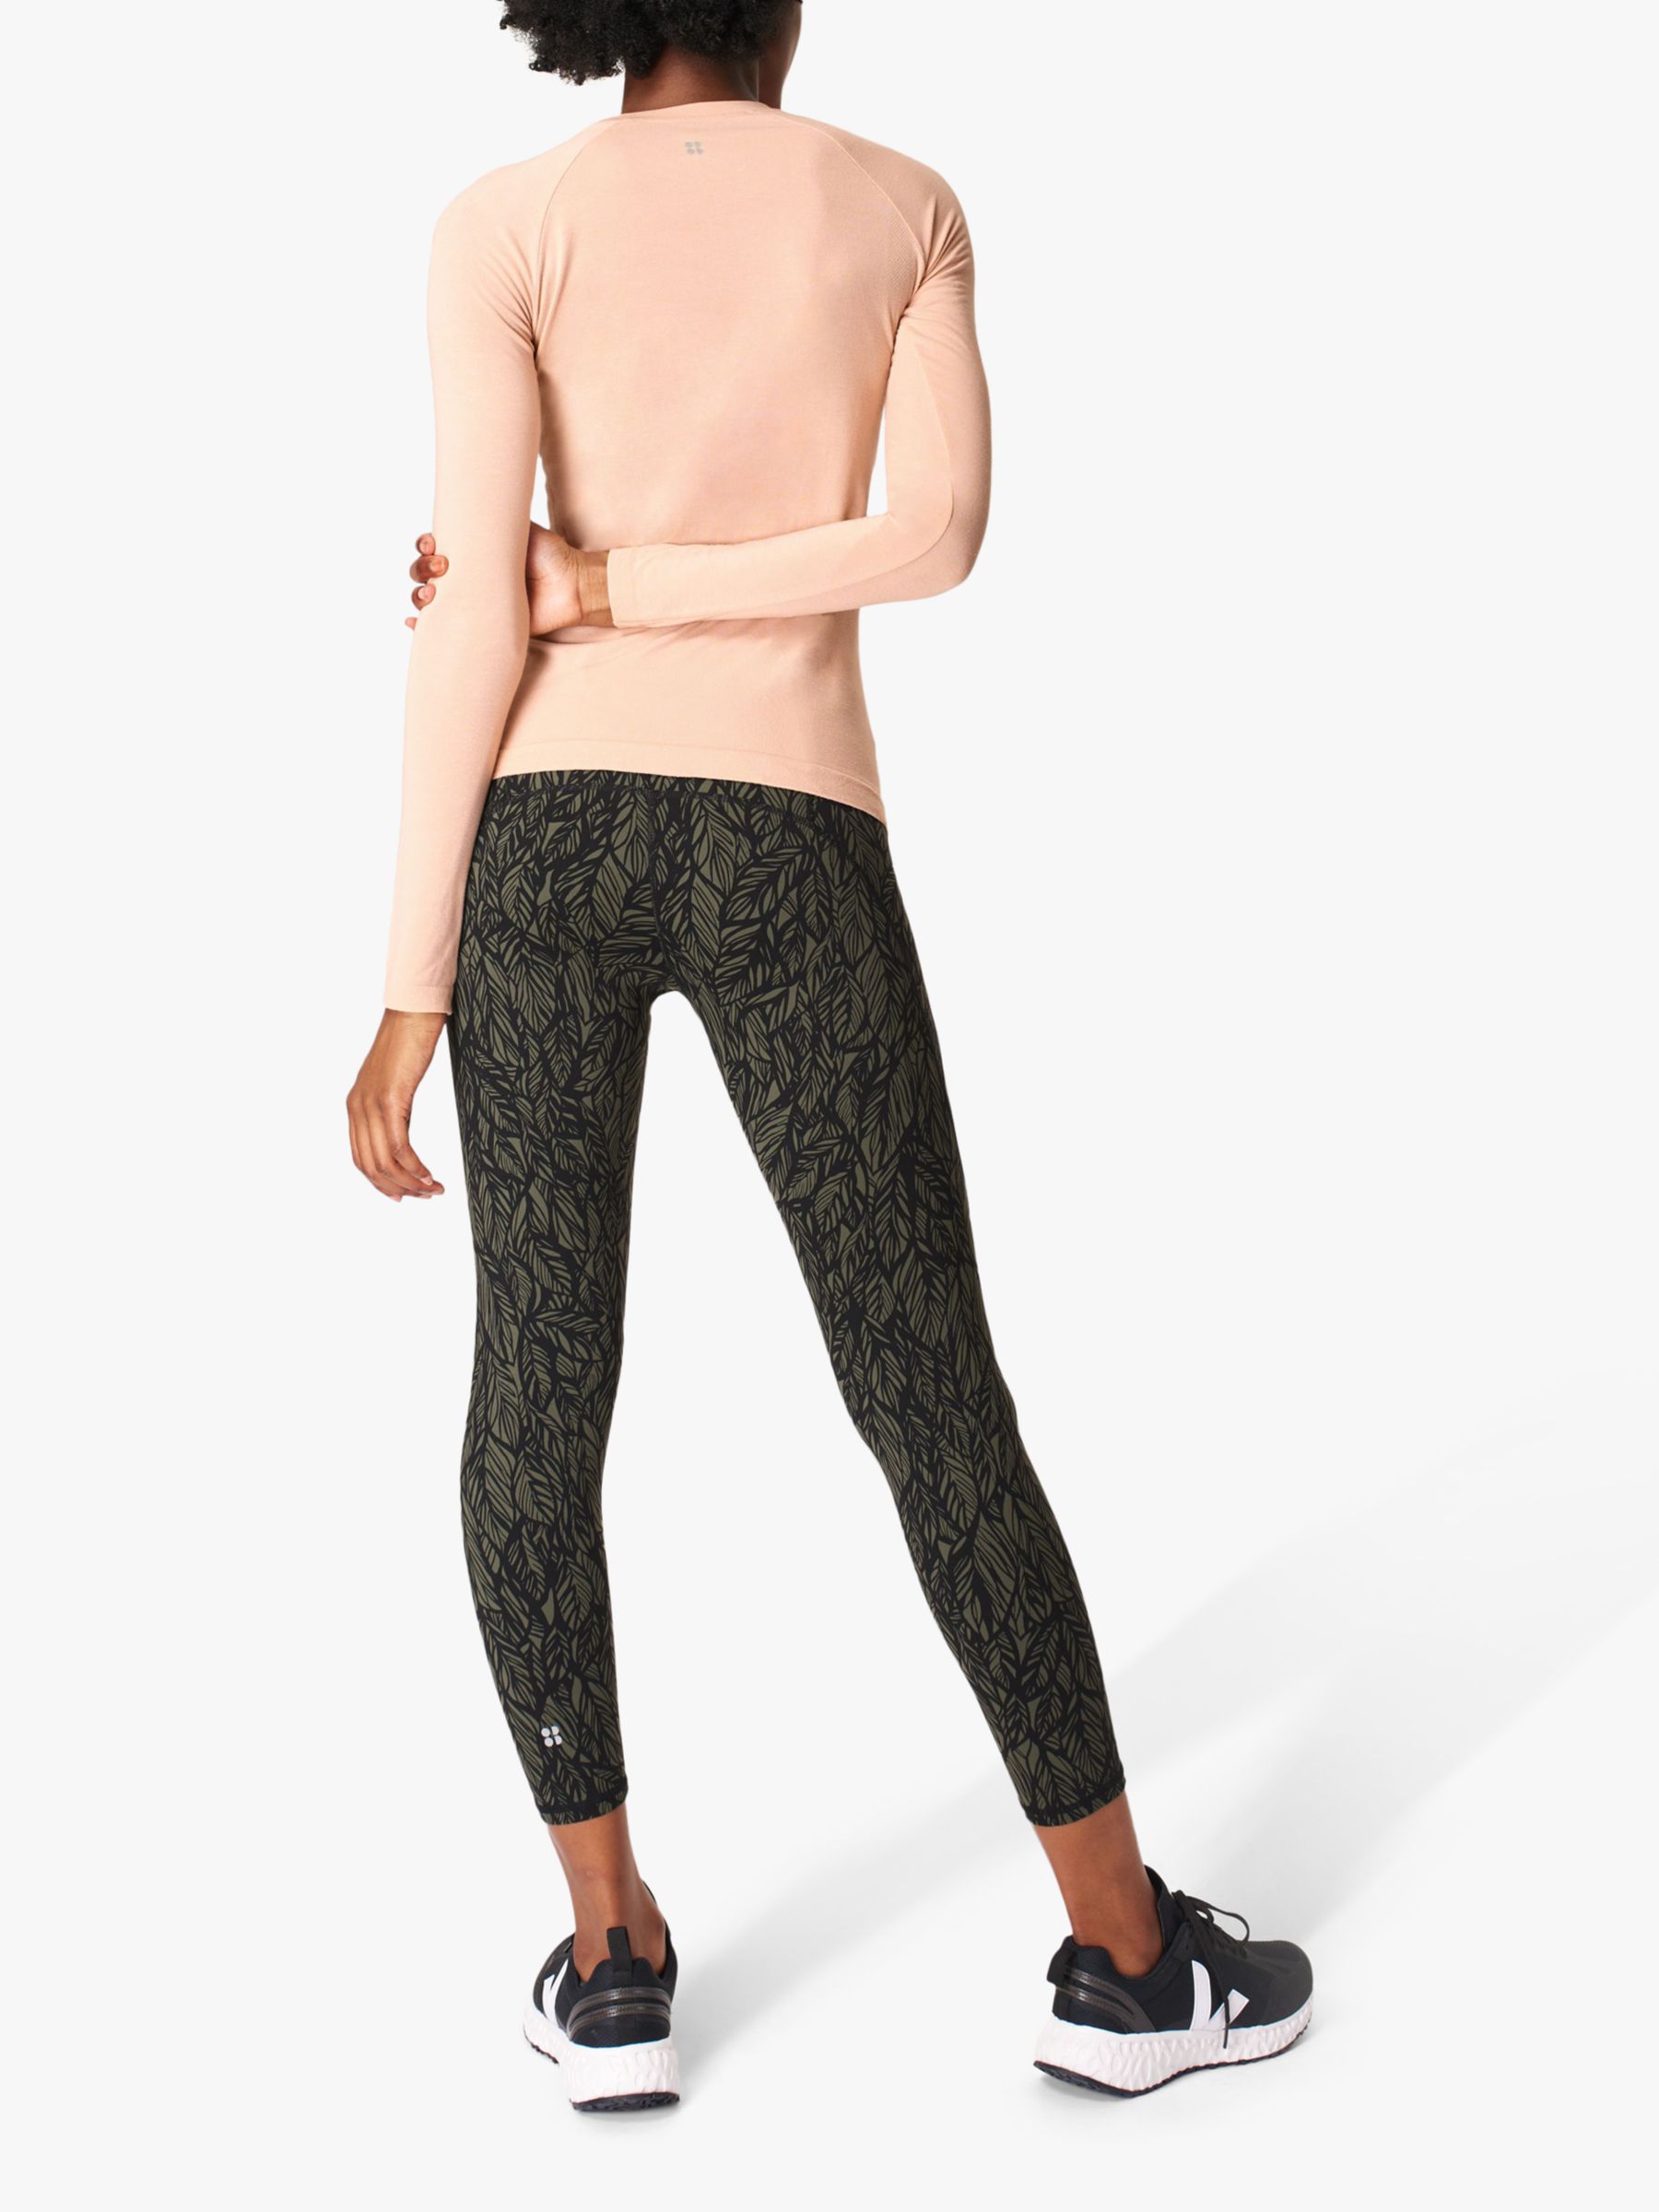 Do Sweaty Betty Leggings Stretch Over Time4learning